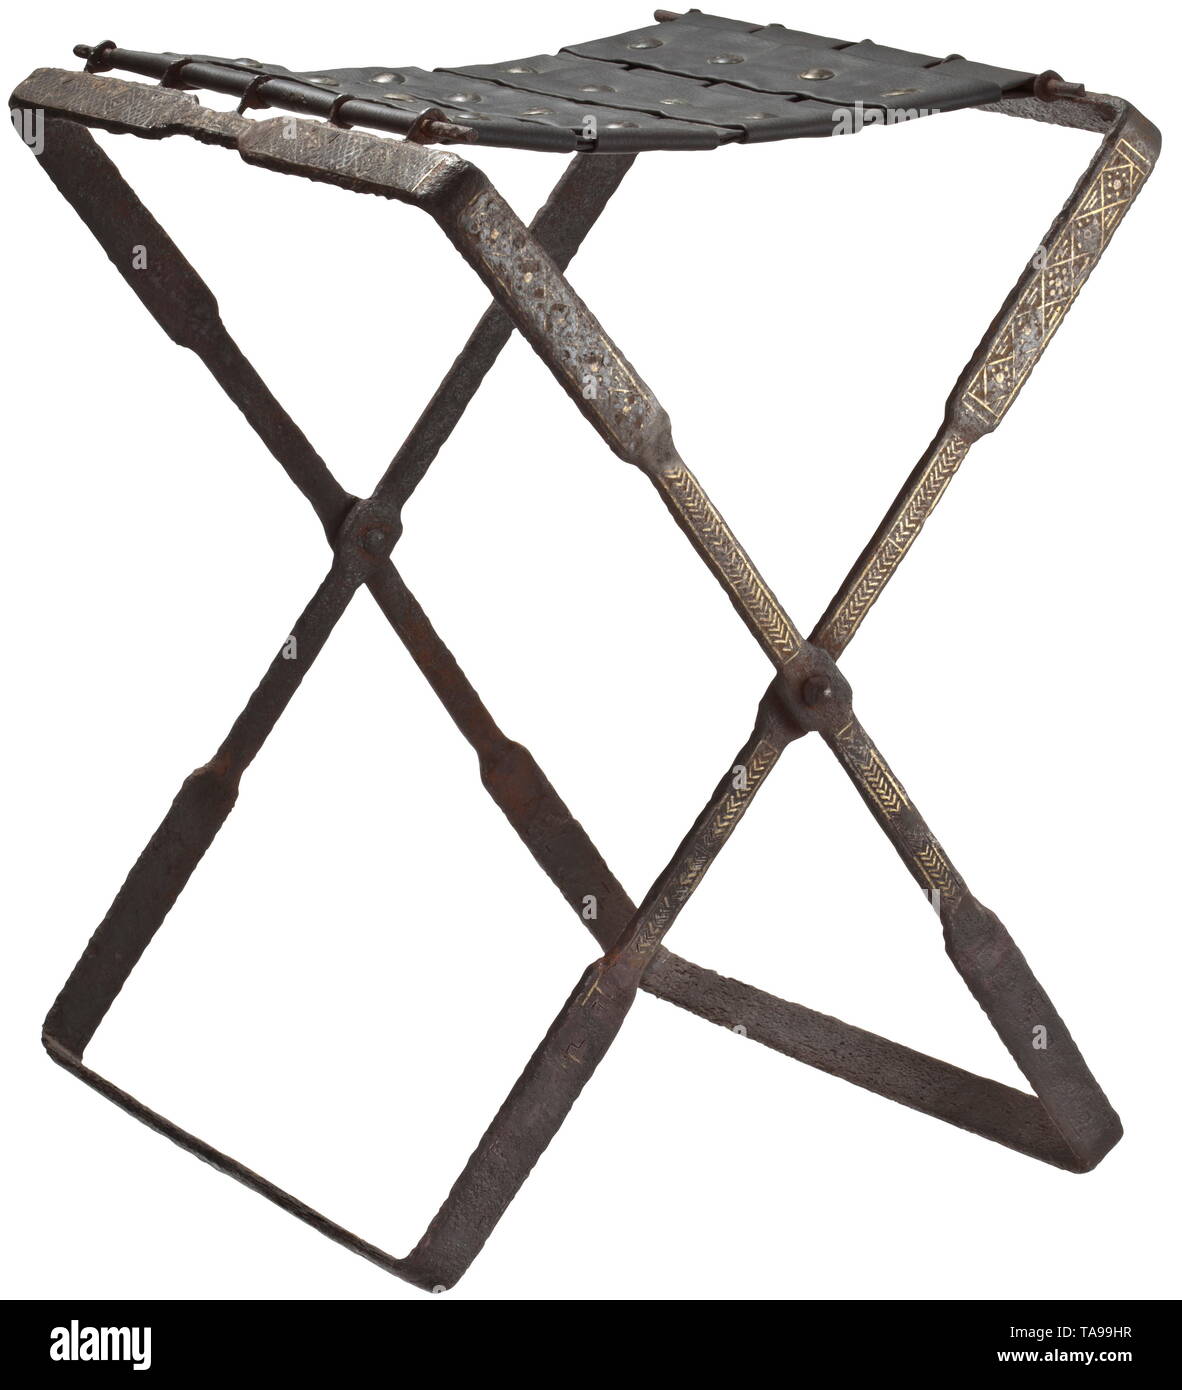 A late Roman iron folding chair with gold-damascening for high officials or military officers, 4th - 5th century Two wrought iron frames of ca. 8 mm width, connected in the middle by a sturdy rivet with a quadrangular stud. This joint functions again due to restoration. Width of frame each ca. 3 cm. Waisted sides and top, after 15 cm at the ends a narrow, only 2 cm wide central section. The top and side surfaces richly decorated with a geometrical pattern of metal wire inlays, silver at the top, bronze at the sides. The inside of the frame on eit, Additional-Rights-Clearance-Info-Not-Available Stock Photo